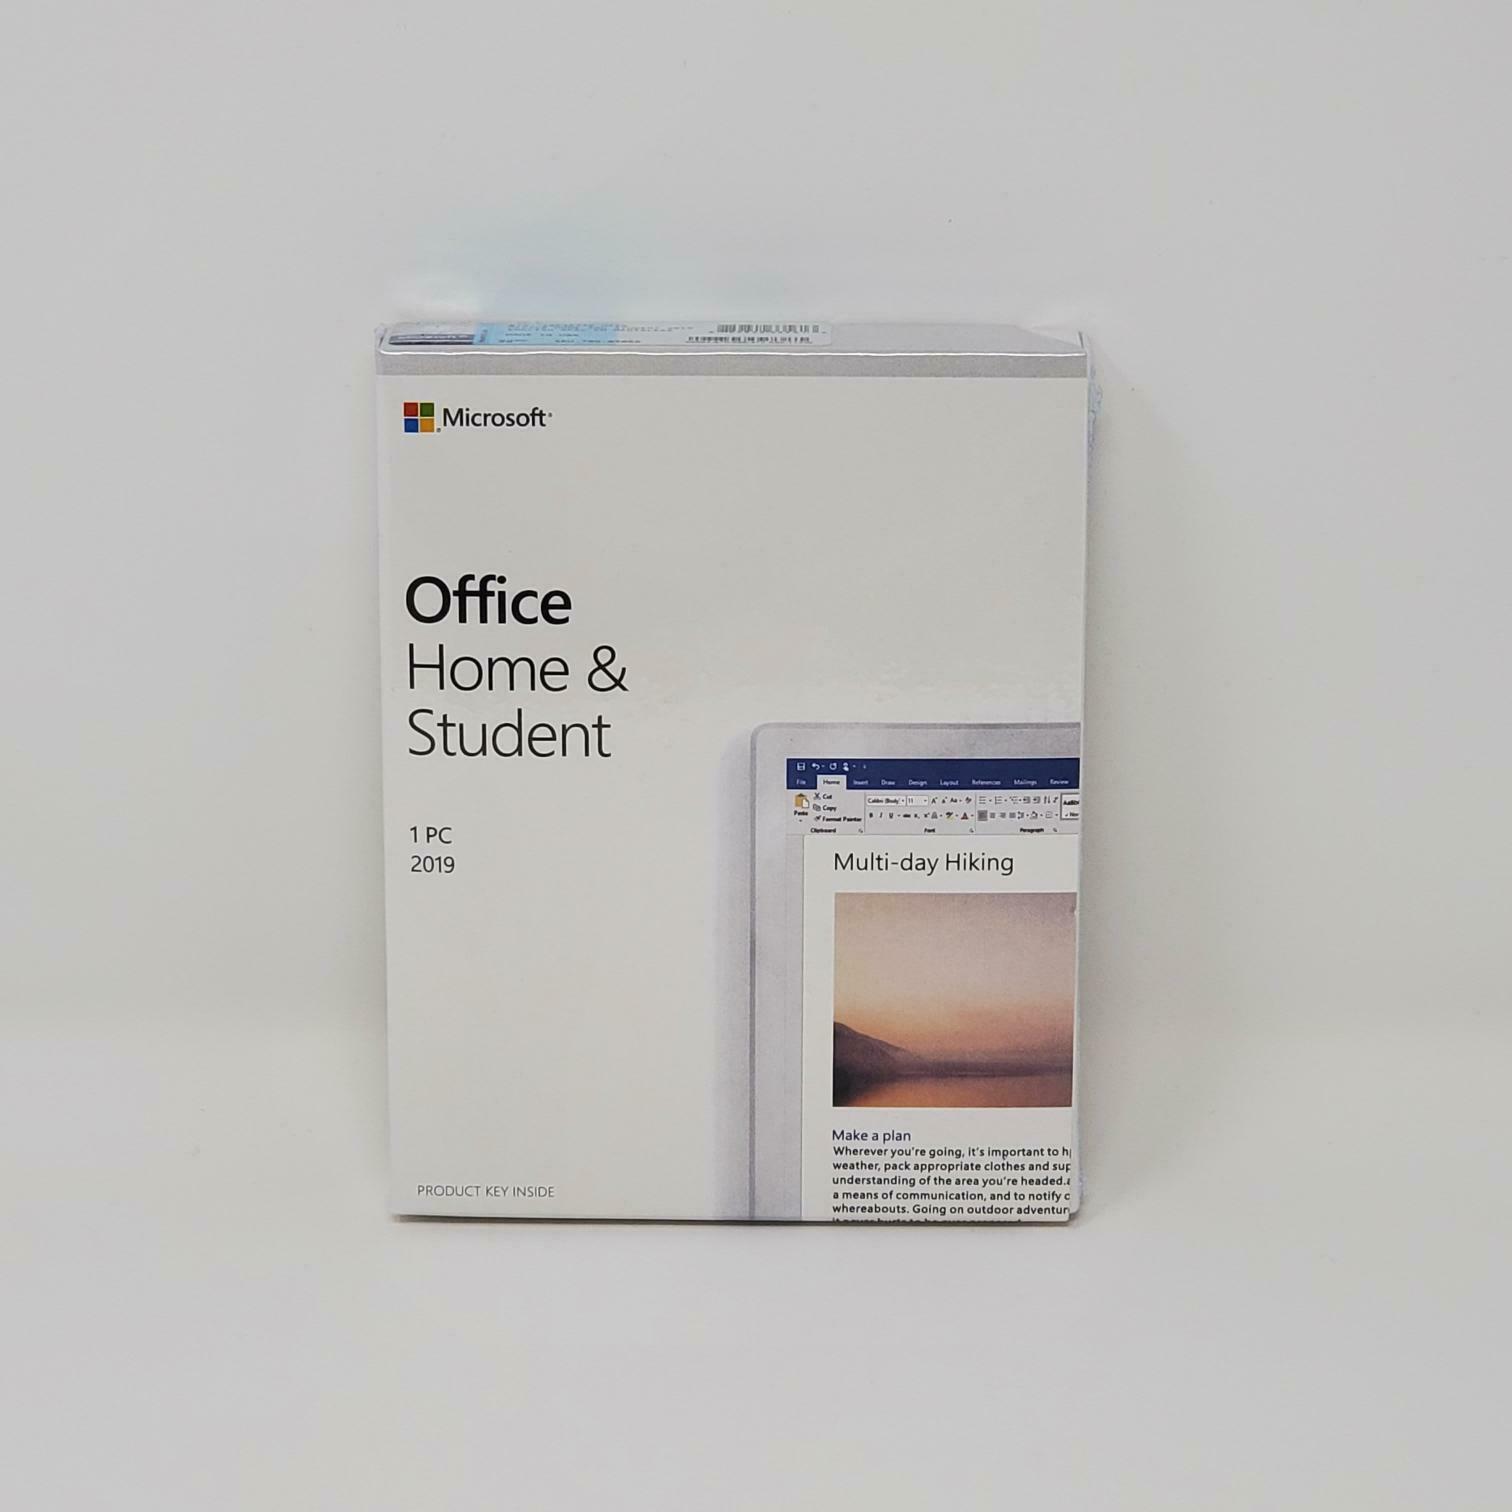 Microsoft Office 2019 Home And Student For Windows 10 1pc Product Key Card New